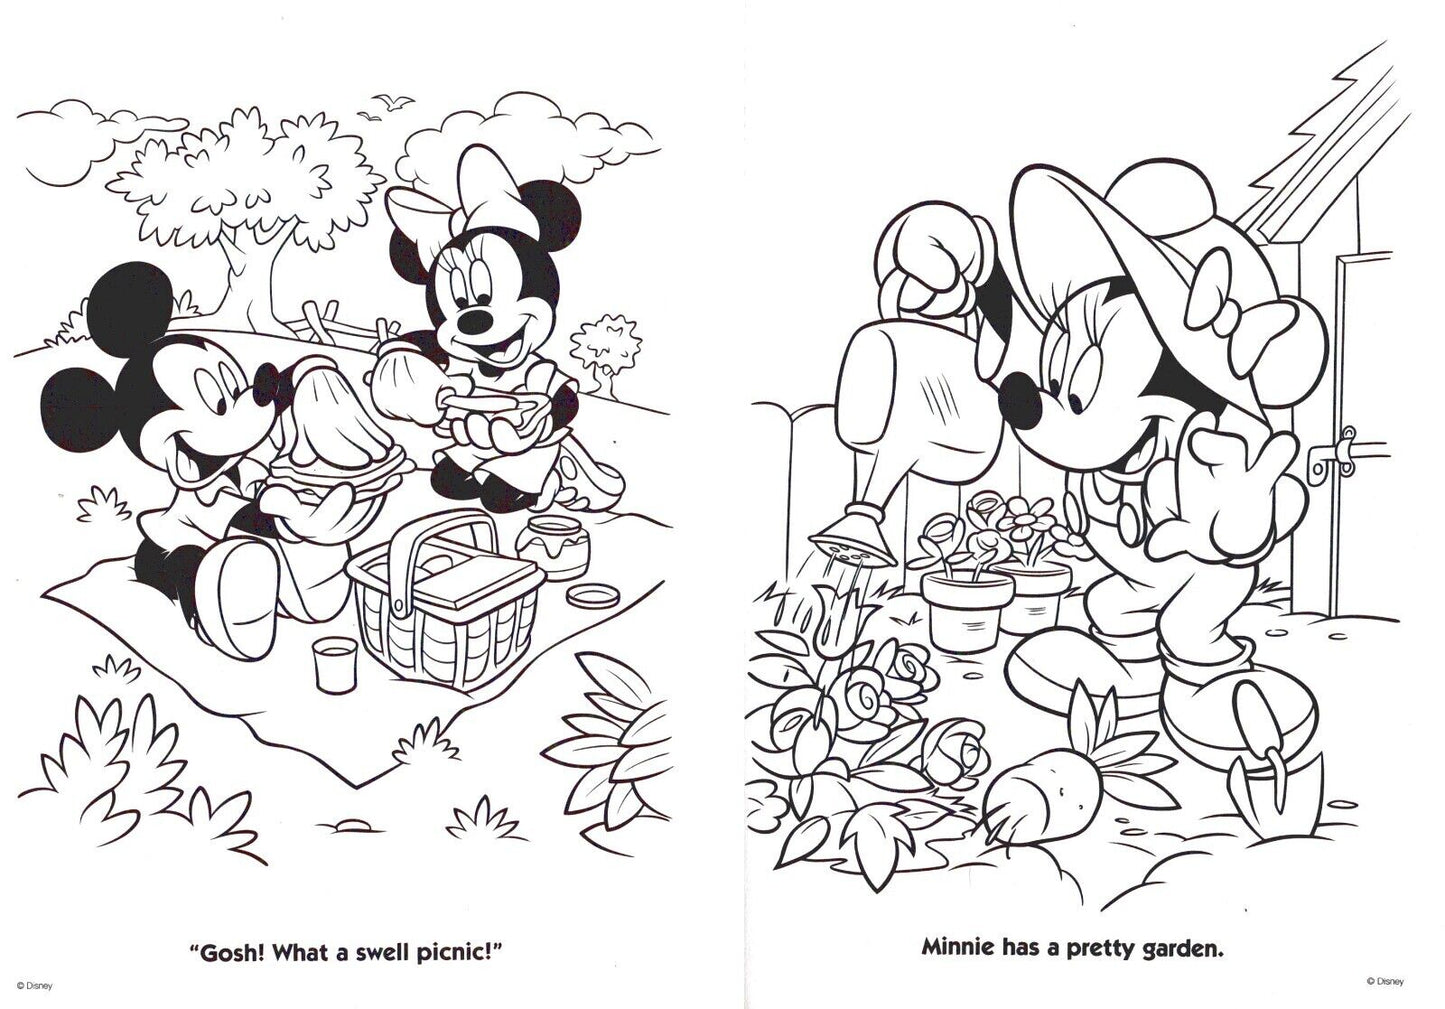 Mickey - Coloring & Activity Book - The Best of Friends & Fun with Friends Set